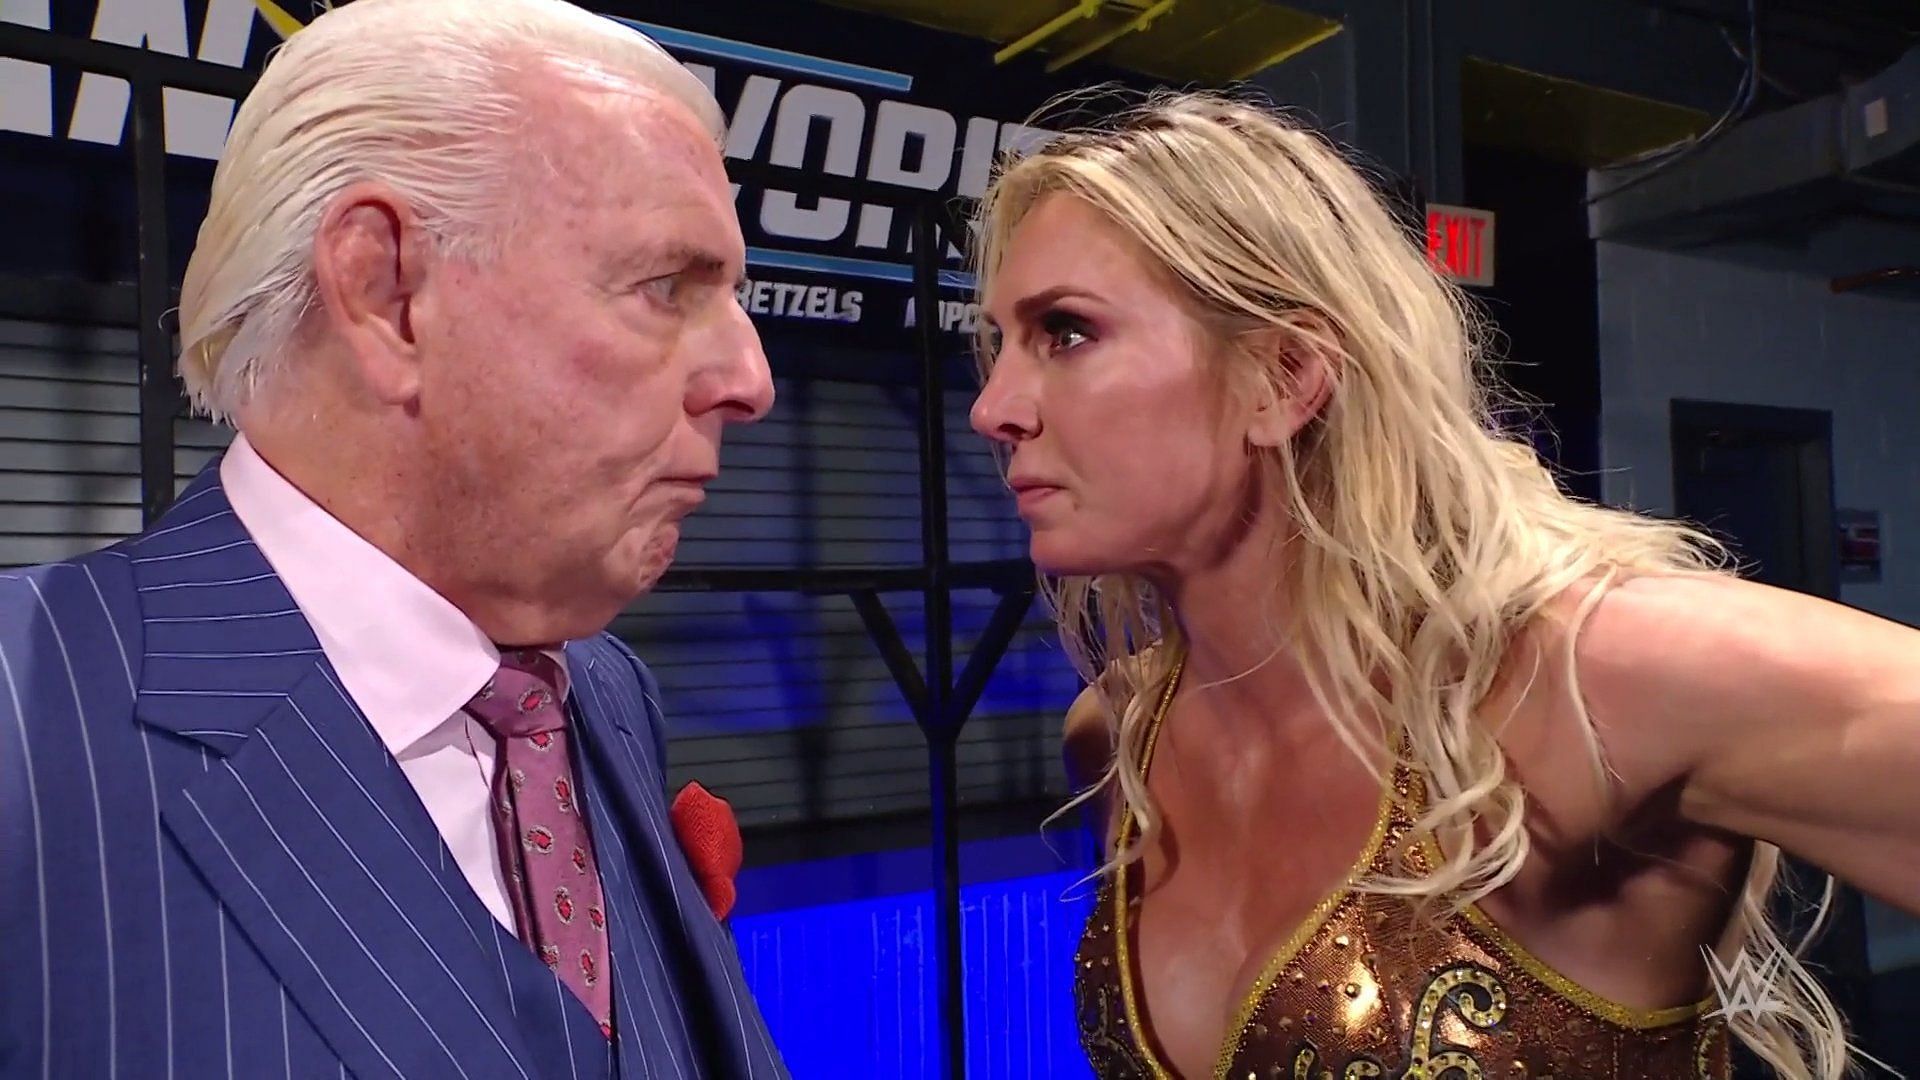 Ric Flair (left) and Charlotte Flair (right)